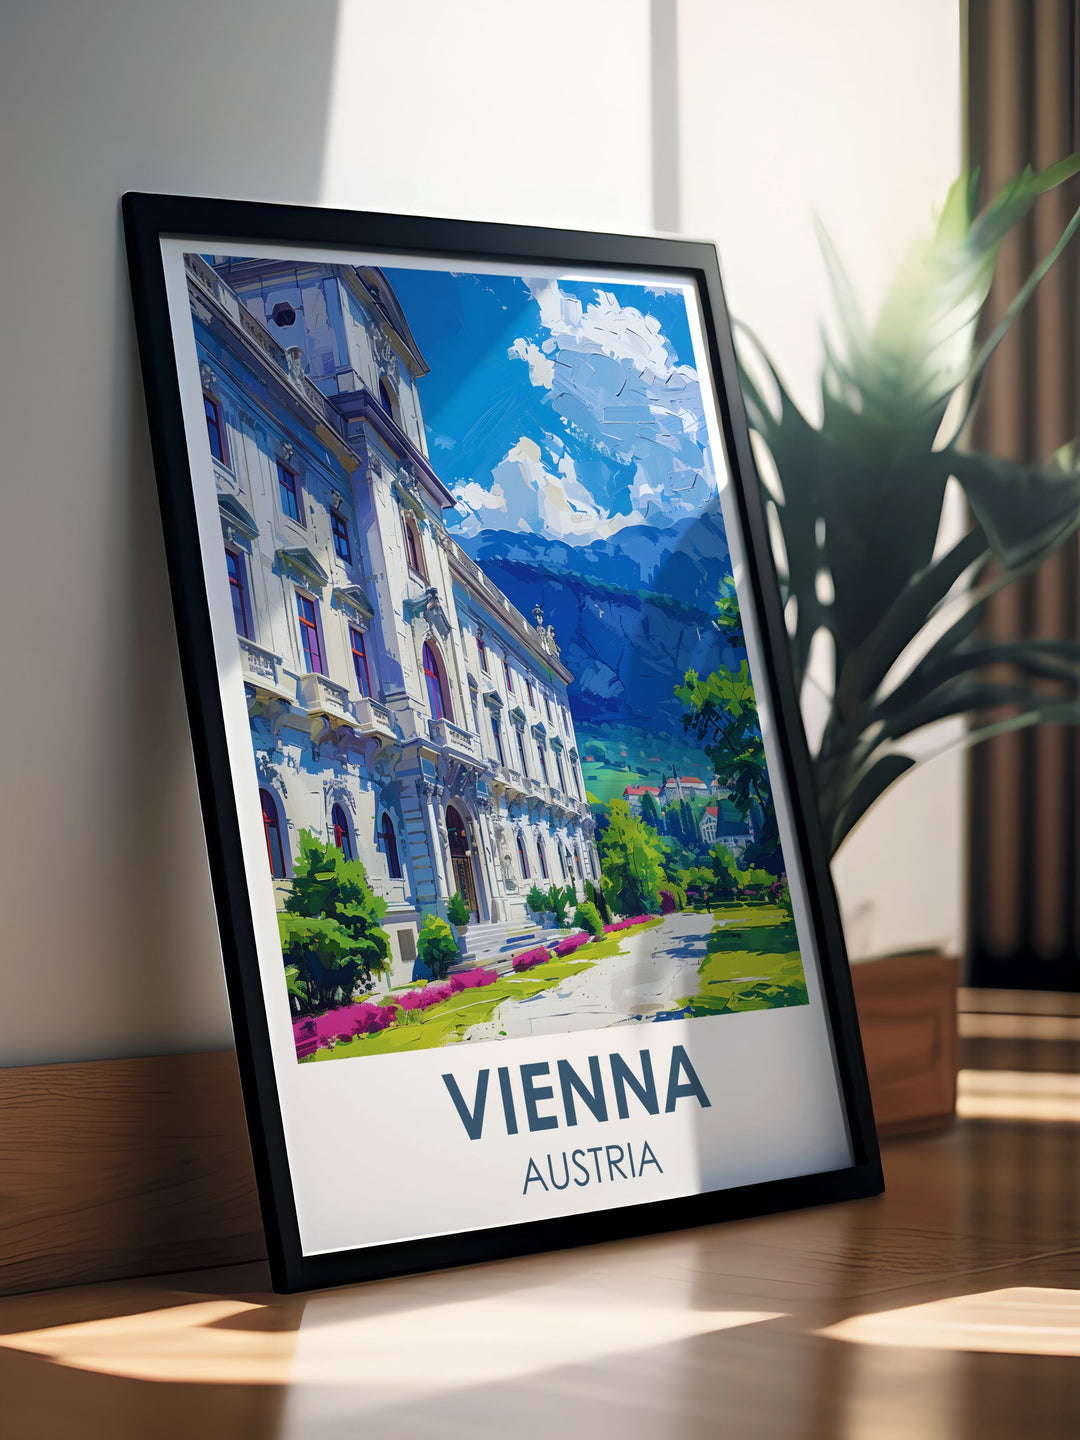 Beautiful Vienna Wall Art depicting Belvedere Palace in all its splendor an excellent addition to your home decor bringing a touch of sophistication and European elegance to any room